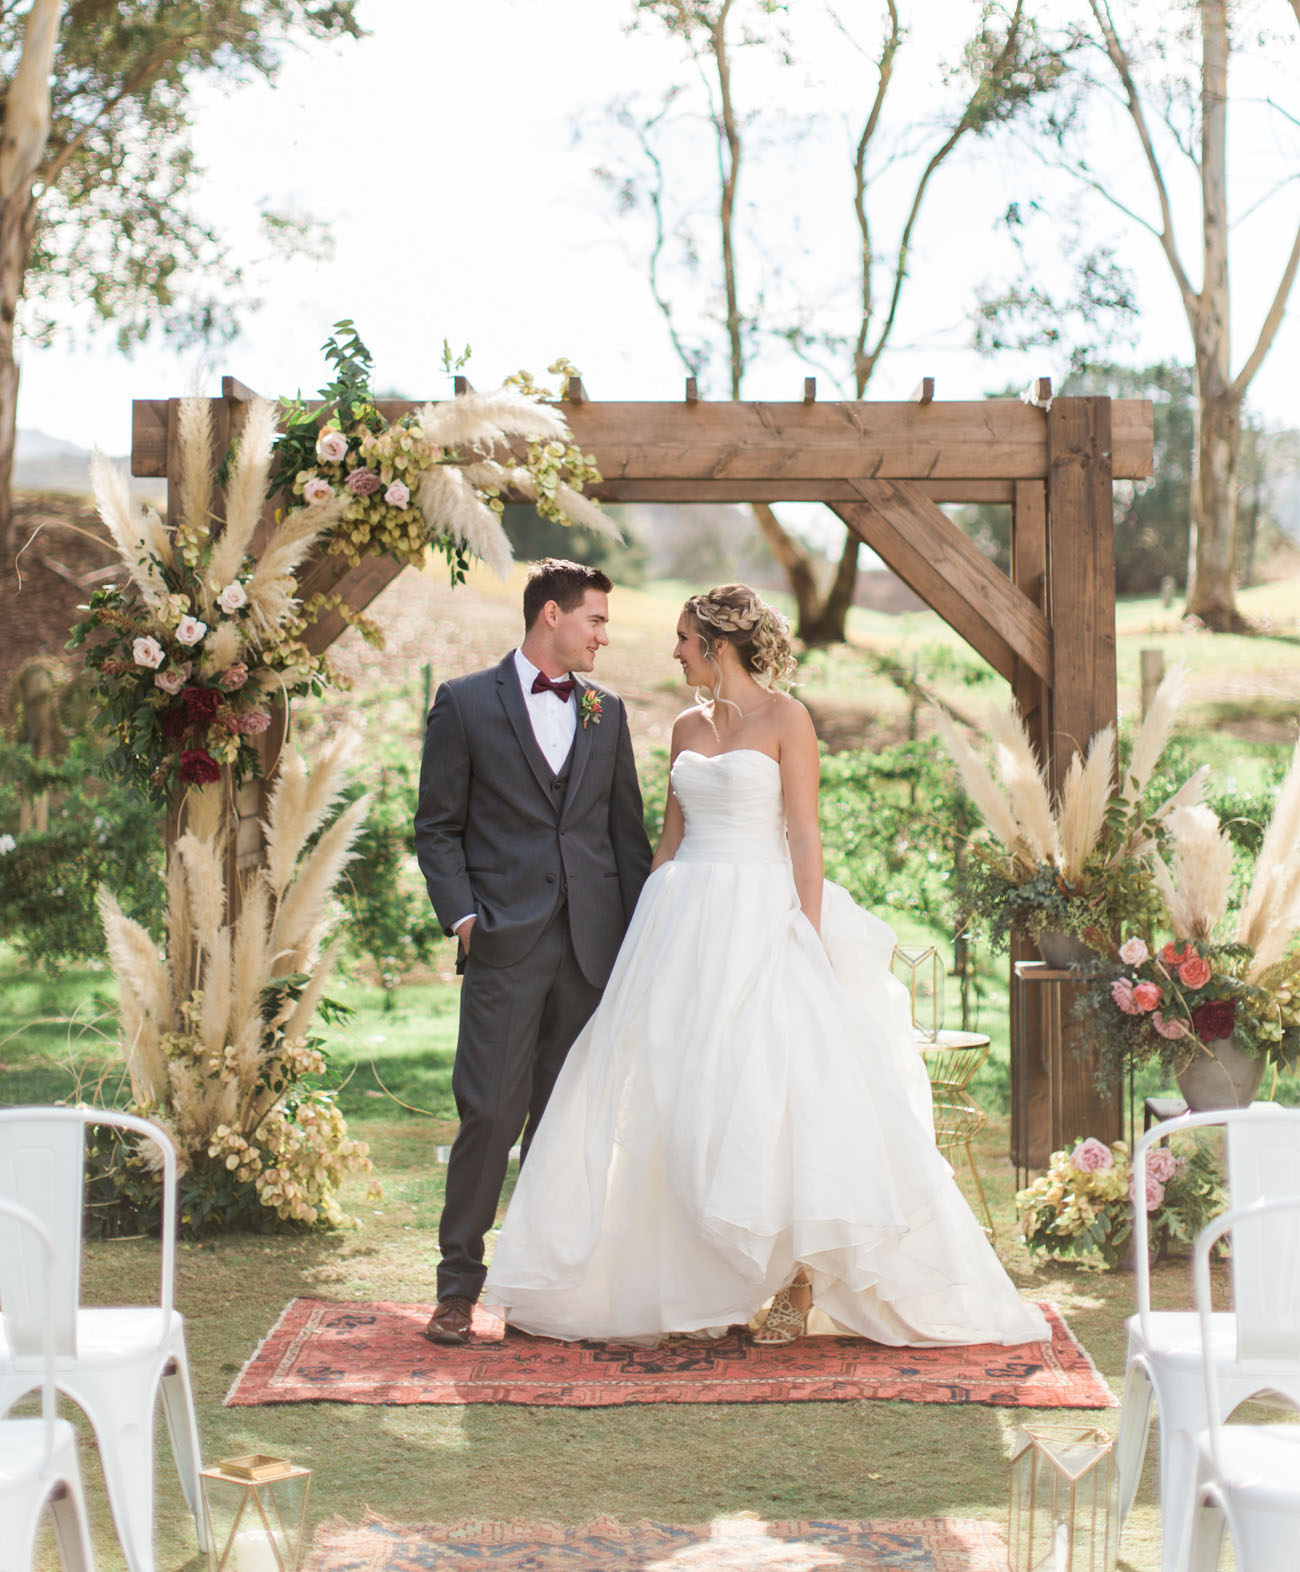 Whimsy Wedding Inspiration in California Wine Country